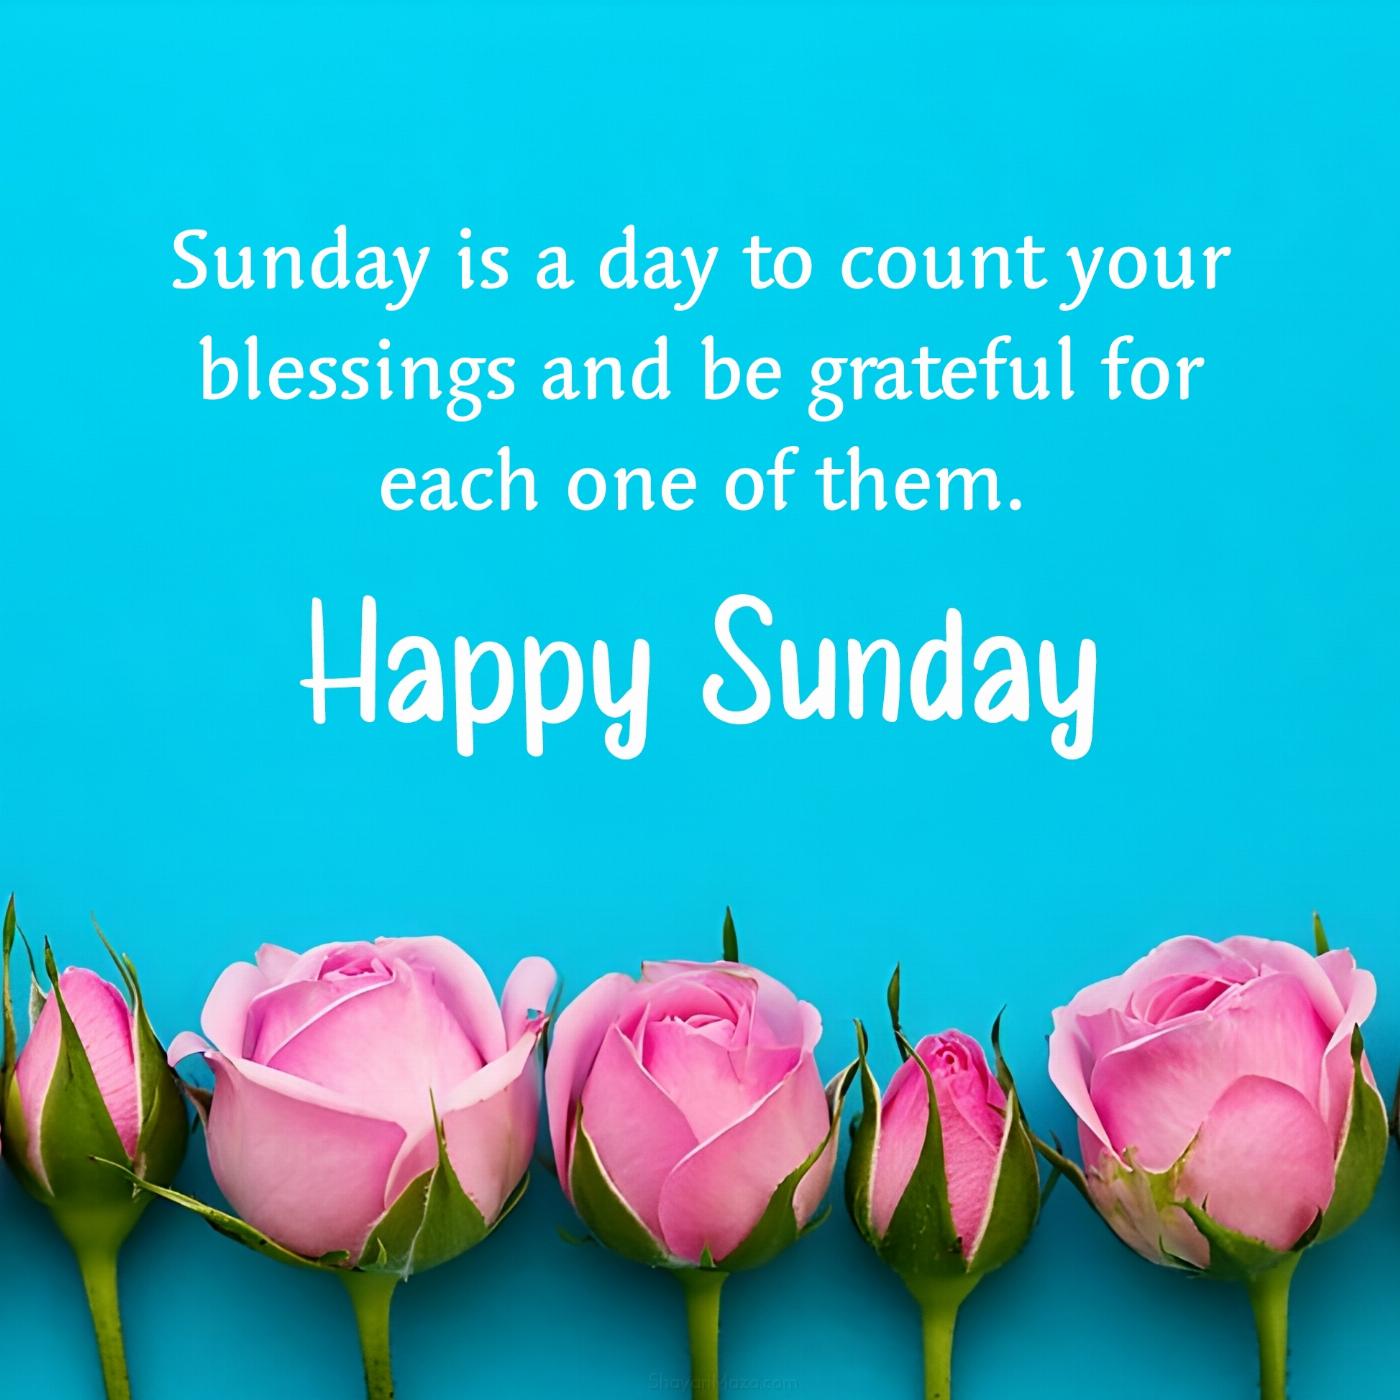 Sunday is a day to count your blessings and be grateful